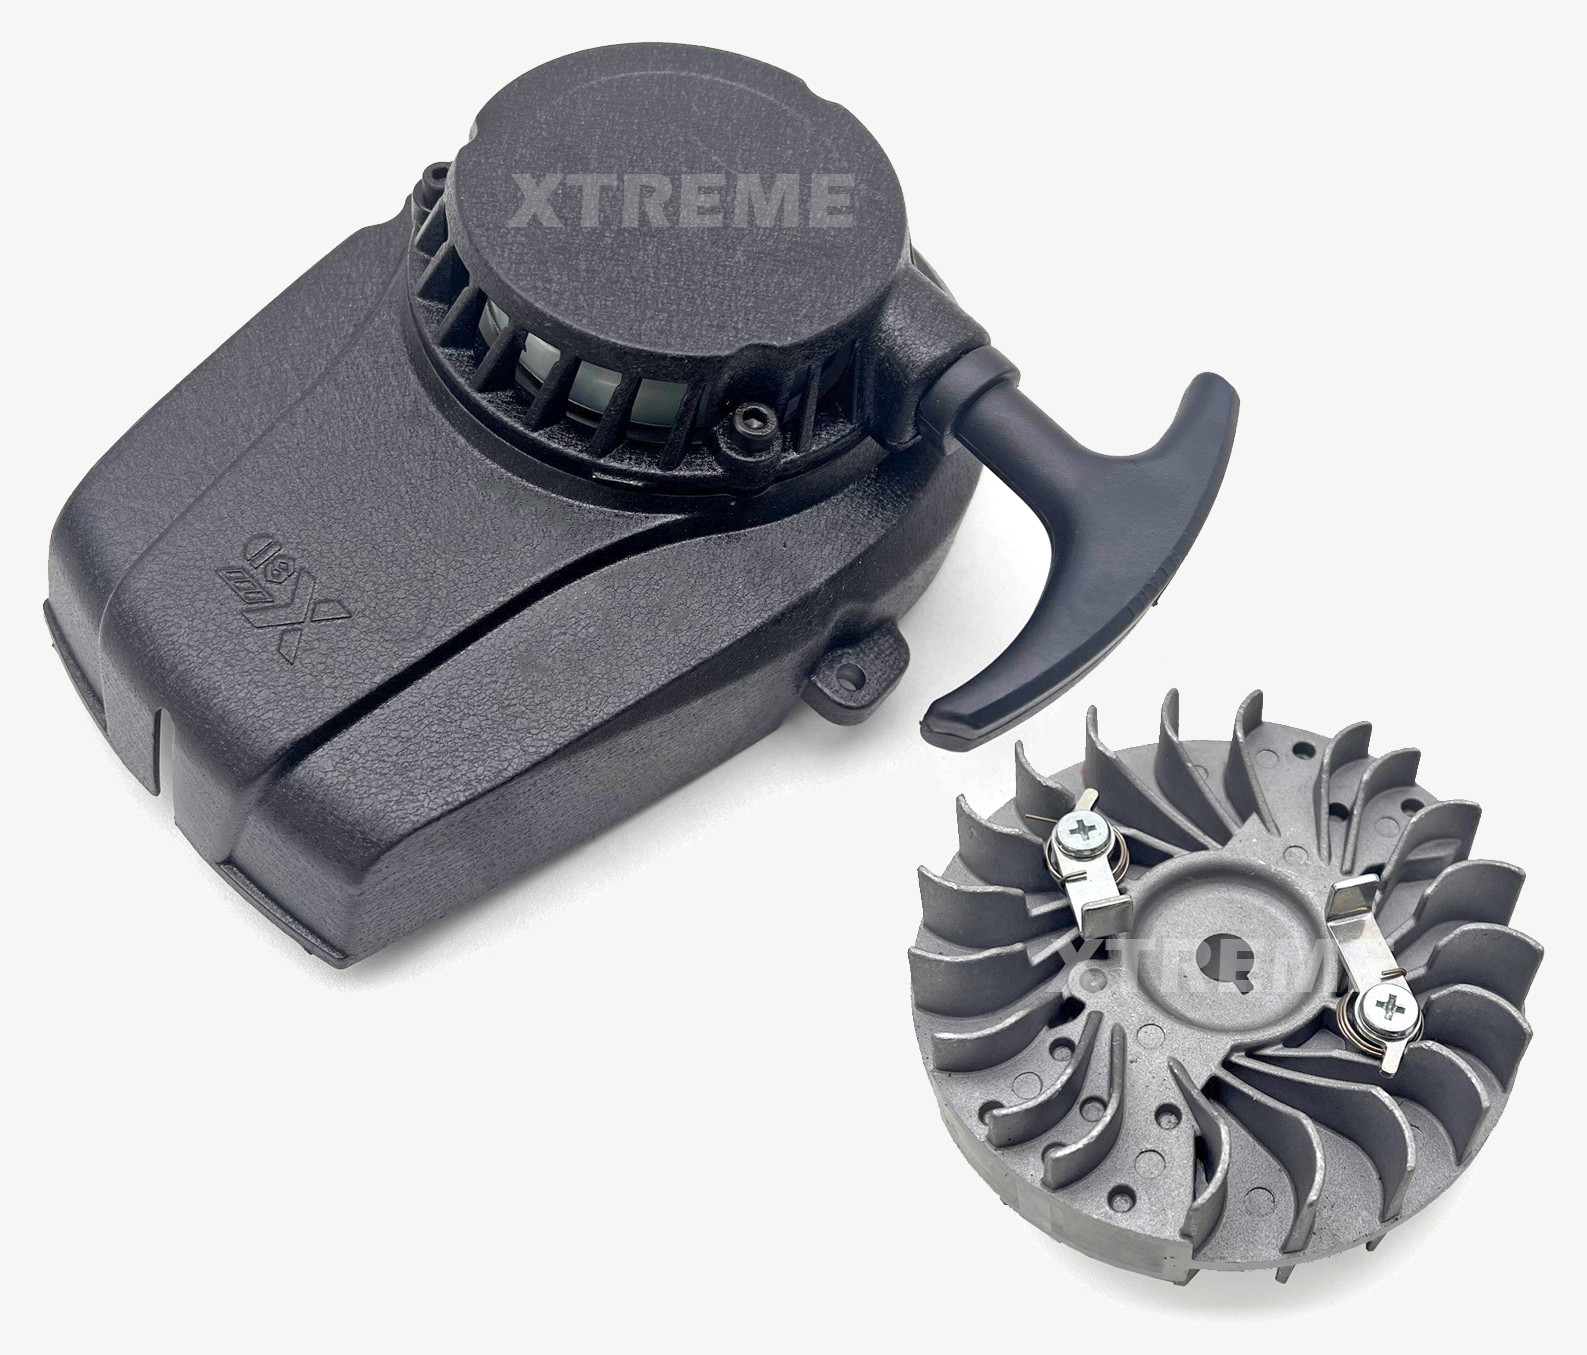 XTM MX60 60CC PETROL DIRT BIKE REPLACEMENT EASY PULL START WITH FLYWHEEL